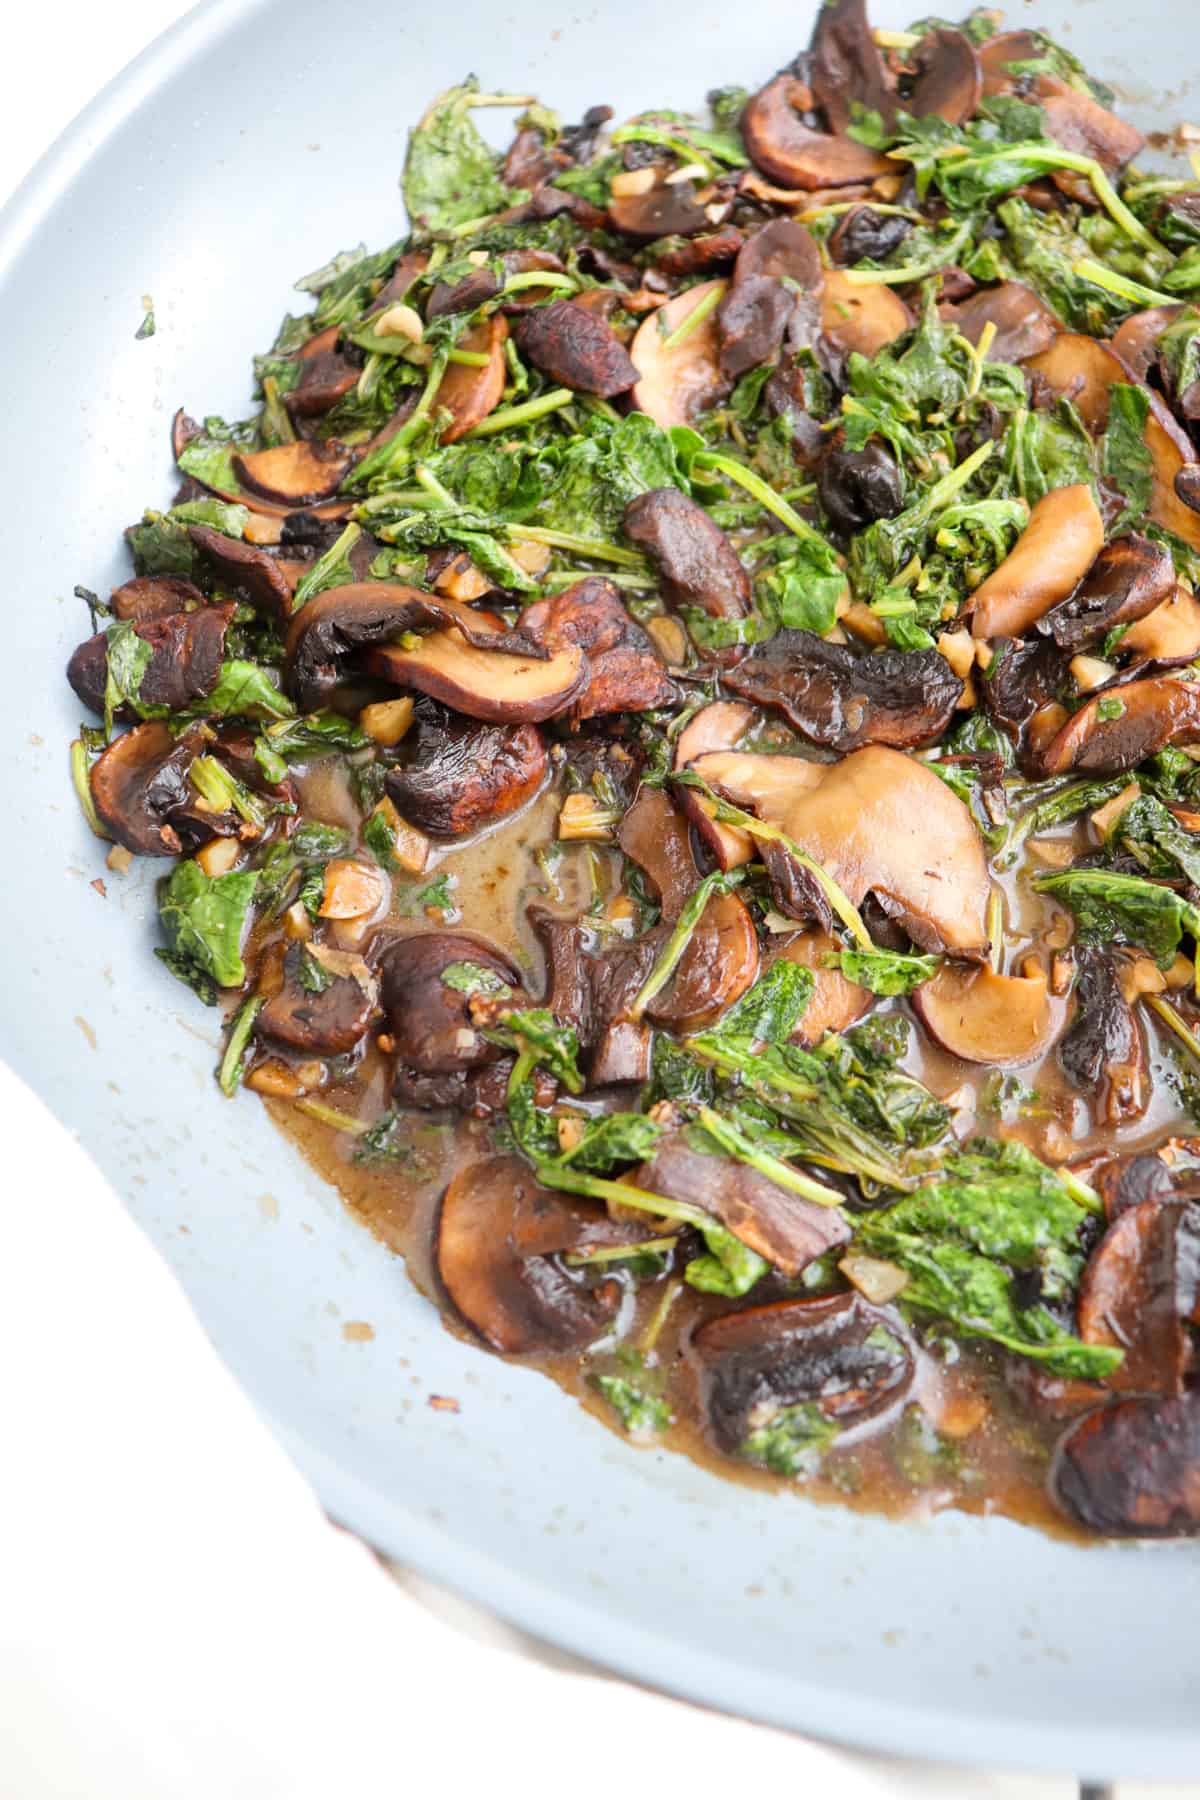 finished sauteed mushrooms and kale with balsamic in a pan up close.